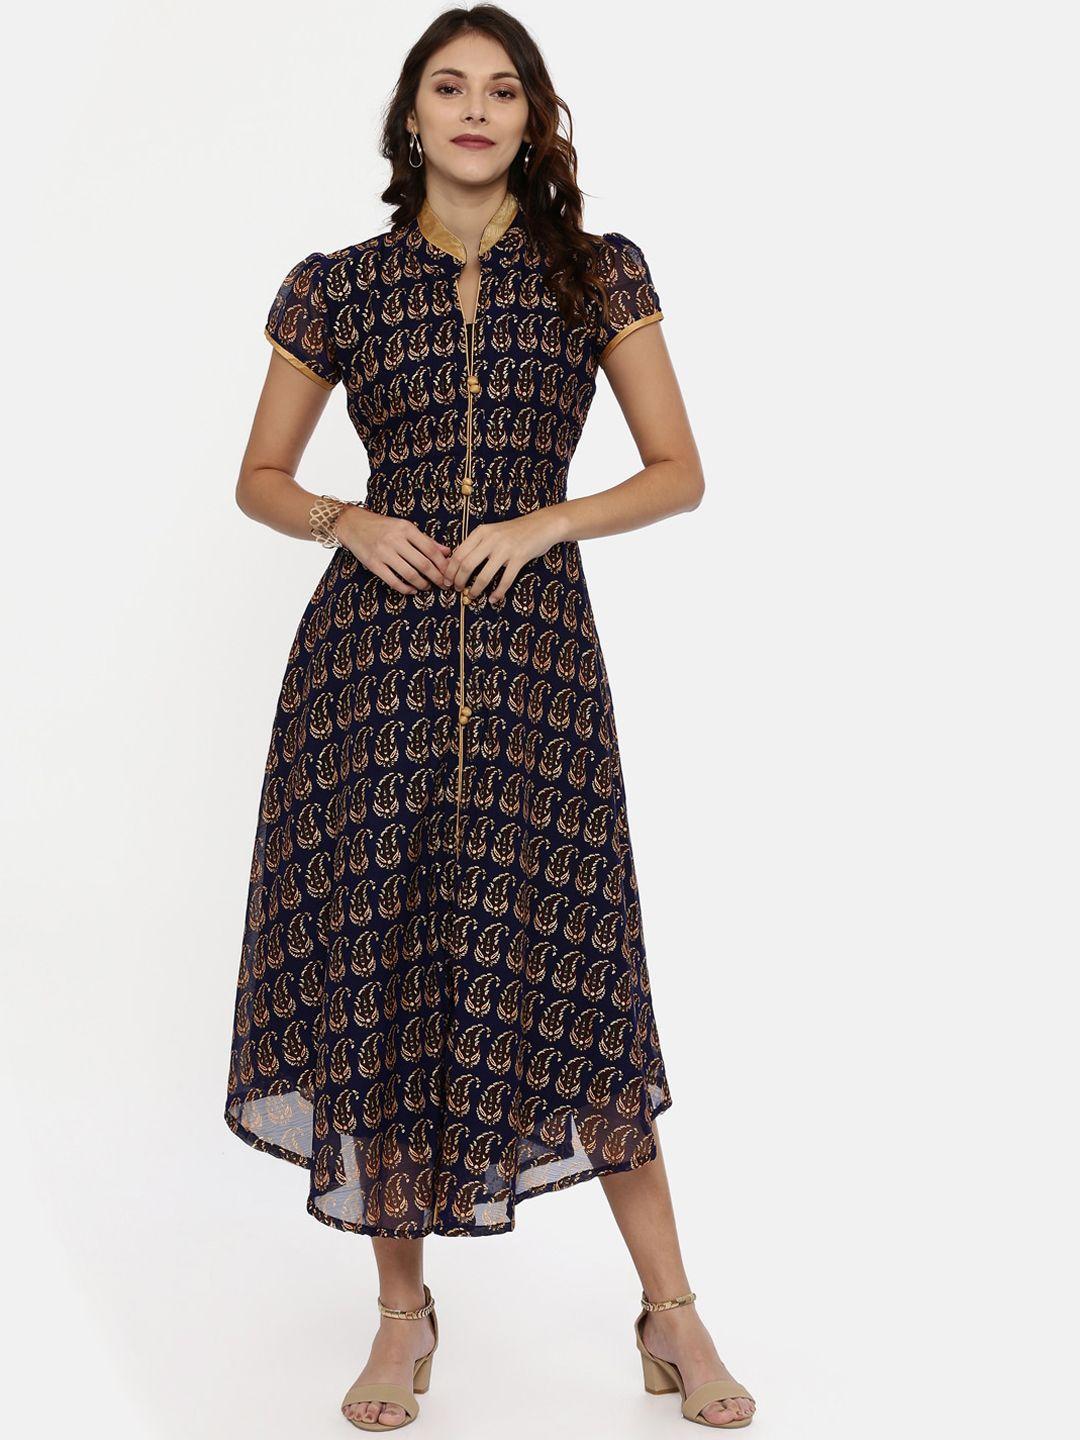 souchii women navy blue & gold floral print fit and flare dress